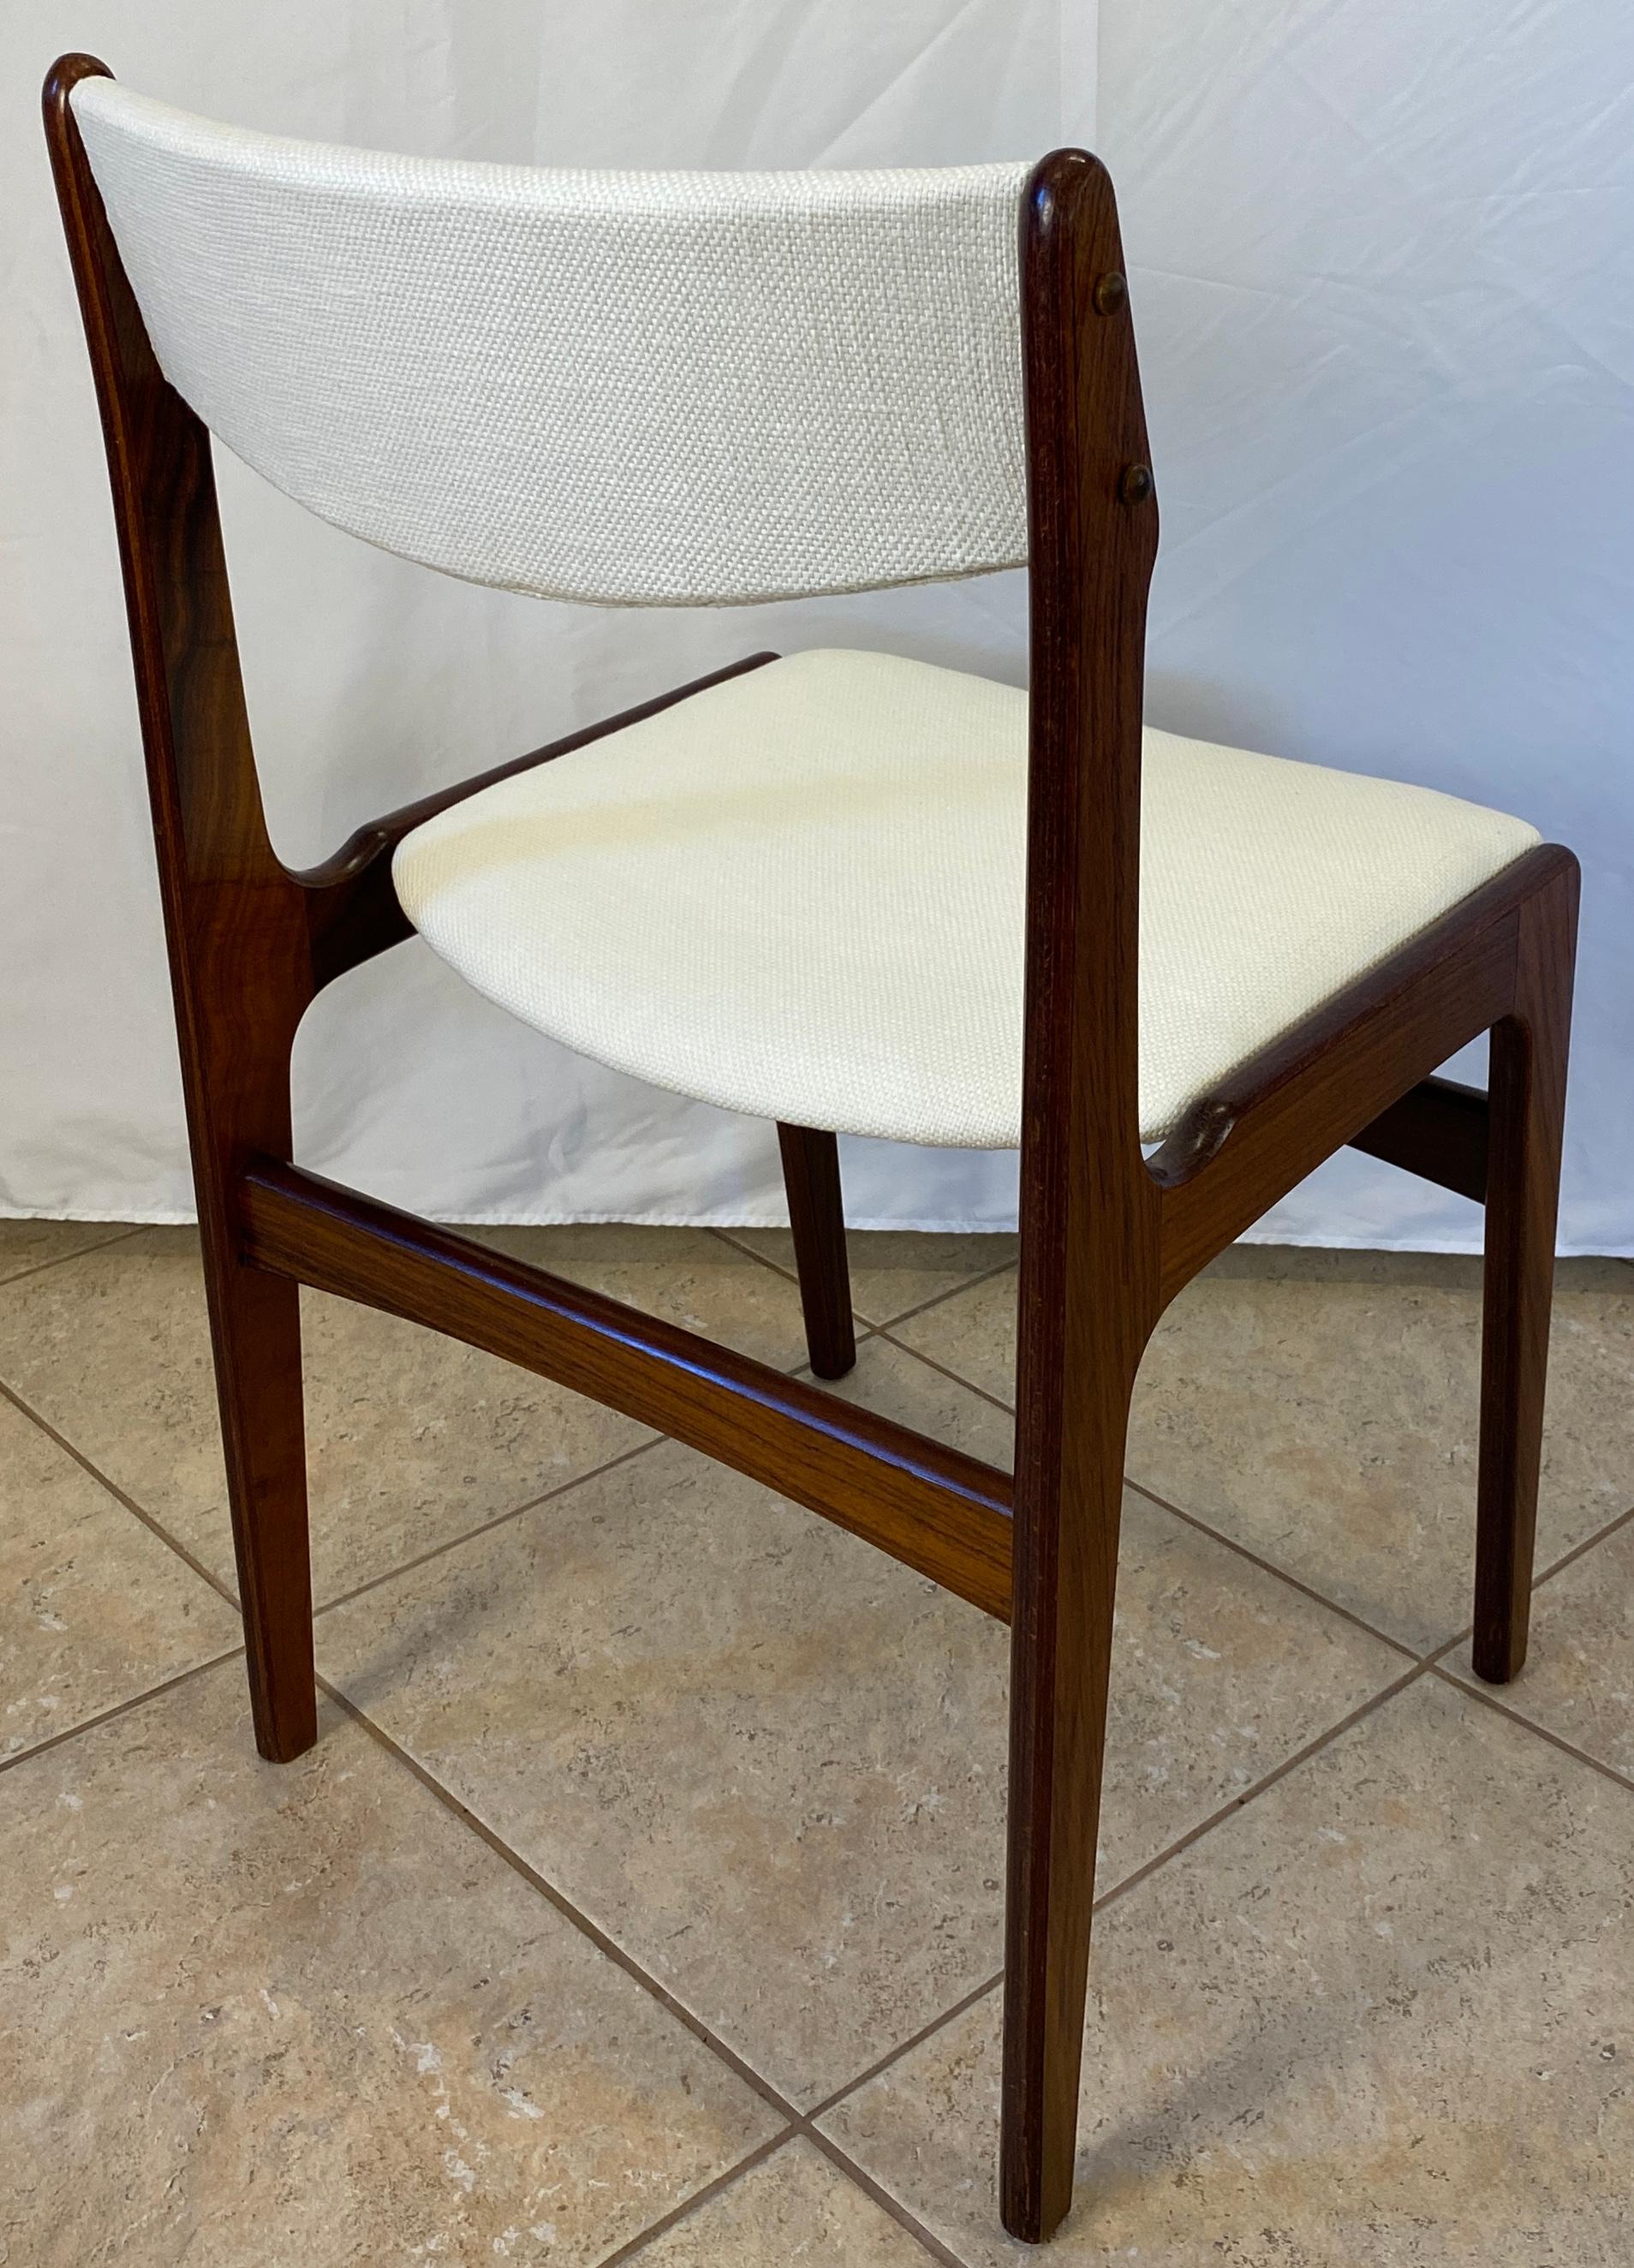 Varnished Set of 4 Mid-Century Modern Danish Dining Room Chairs  For Sale